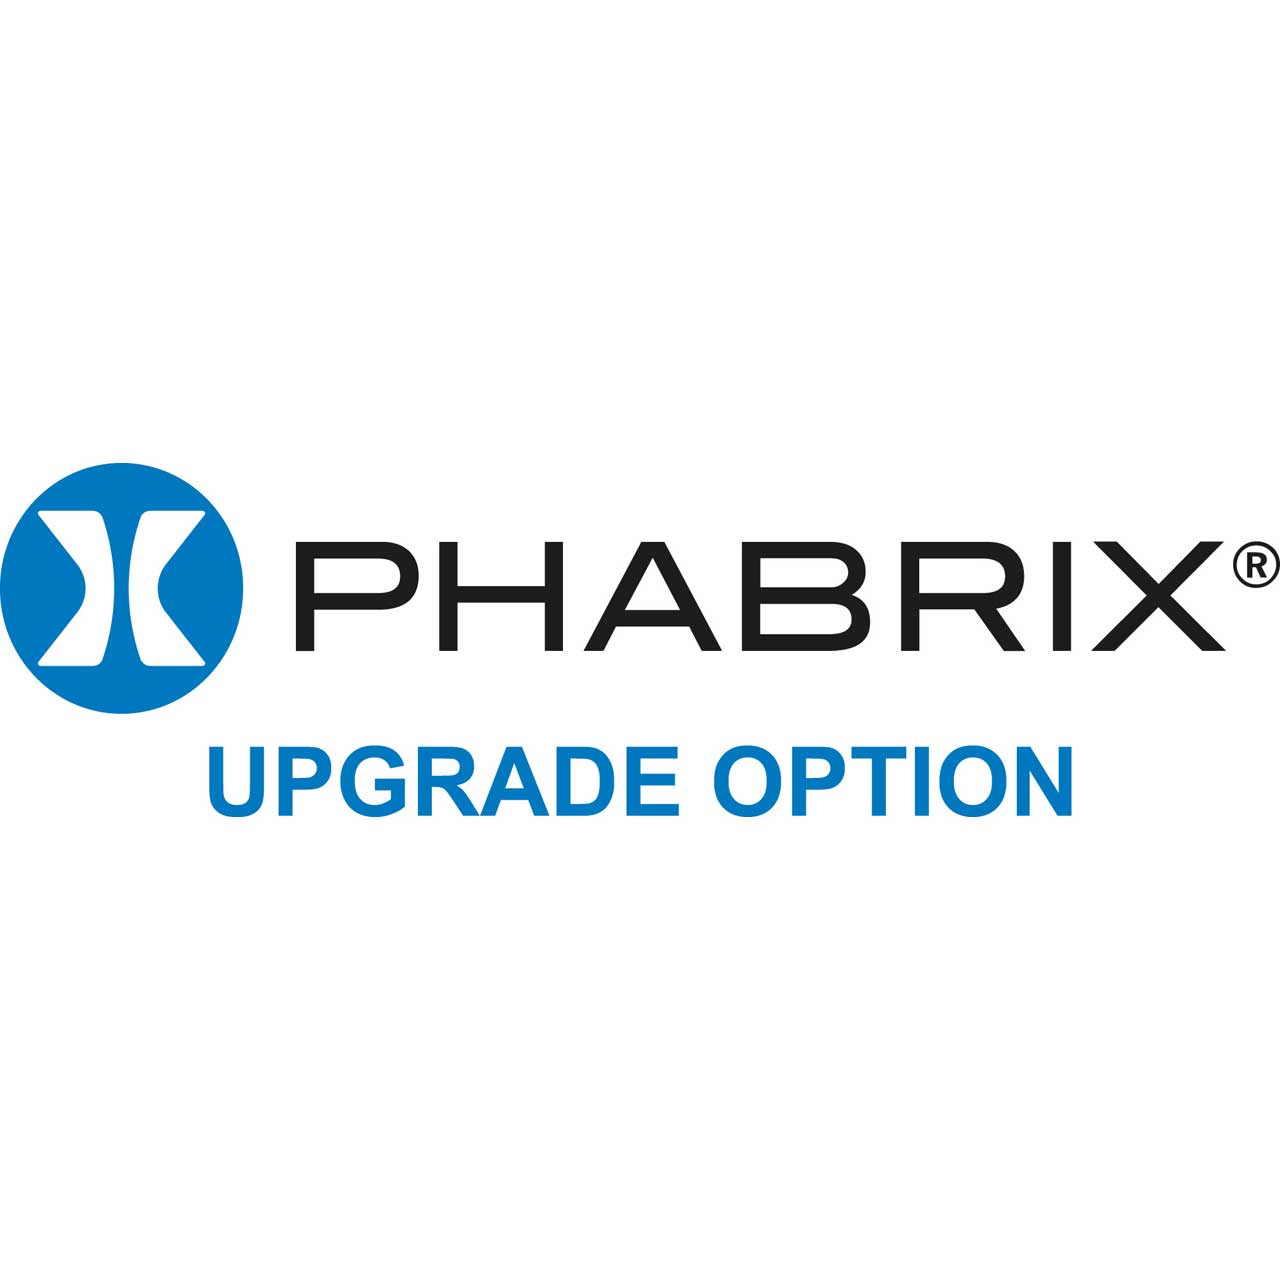 Phabrix PHQXO-IP-NGT IP Network Traffic Generation Toolset (requires PHQXO-IP-STND and PHQXO-GEN) - Download  PHQXO-IP-NGT